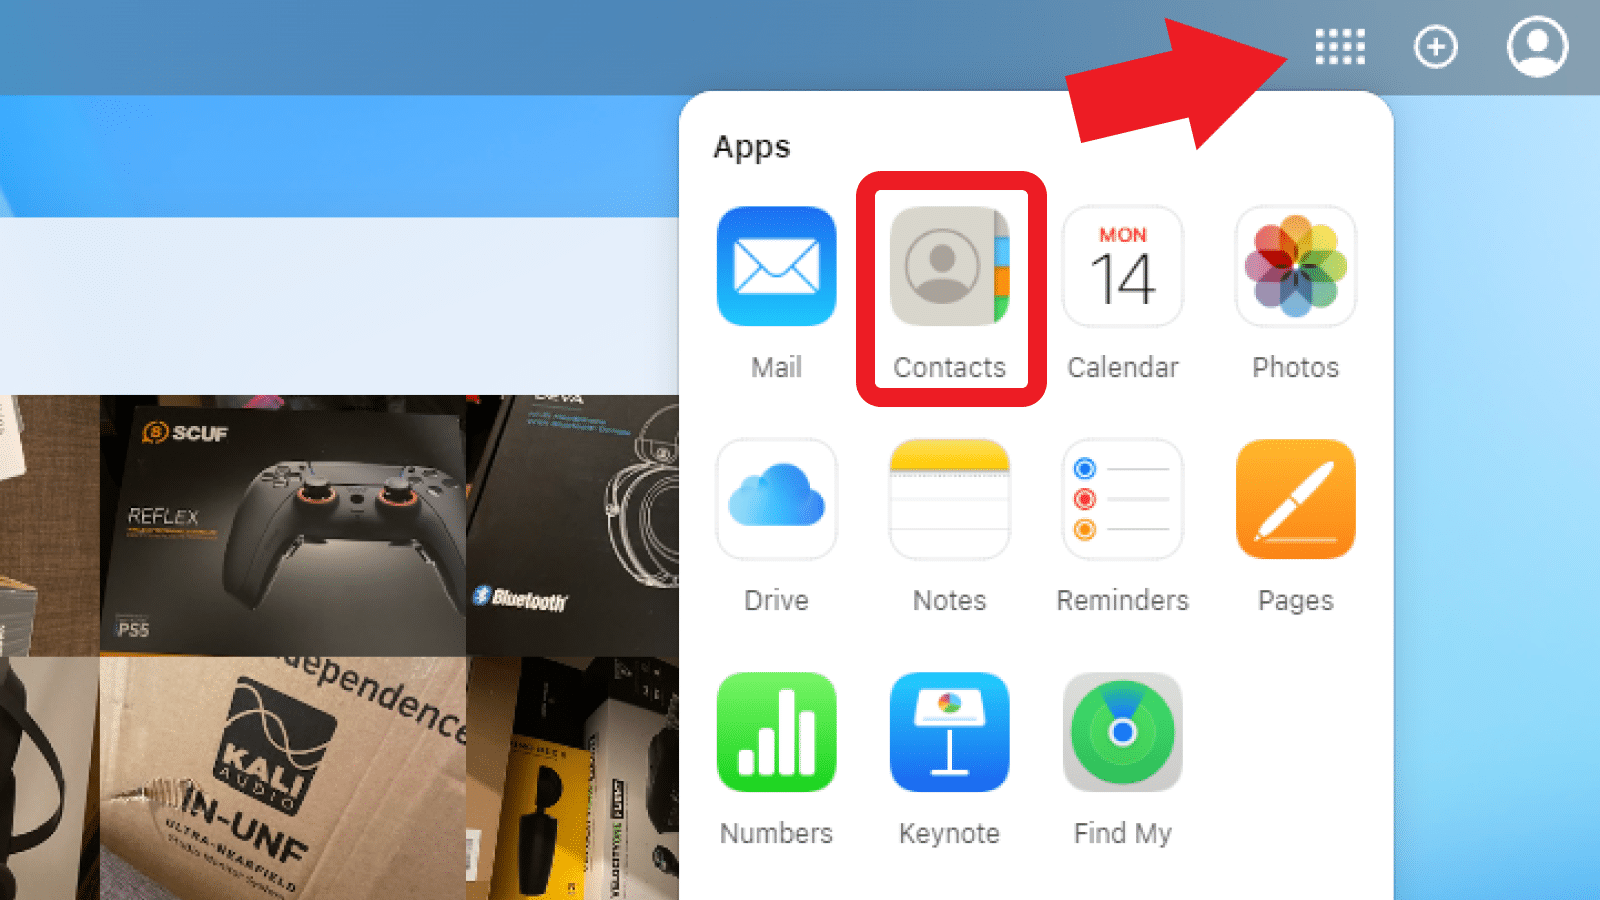 The image shows a list of various applications on iCloud.com